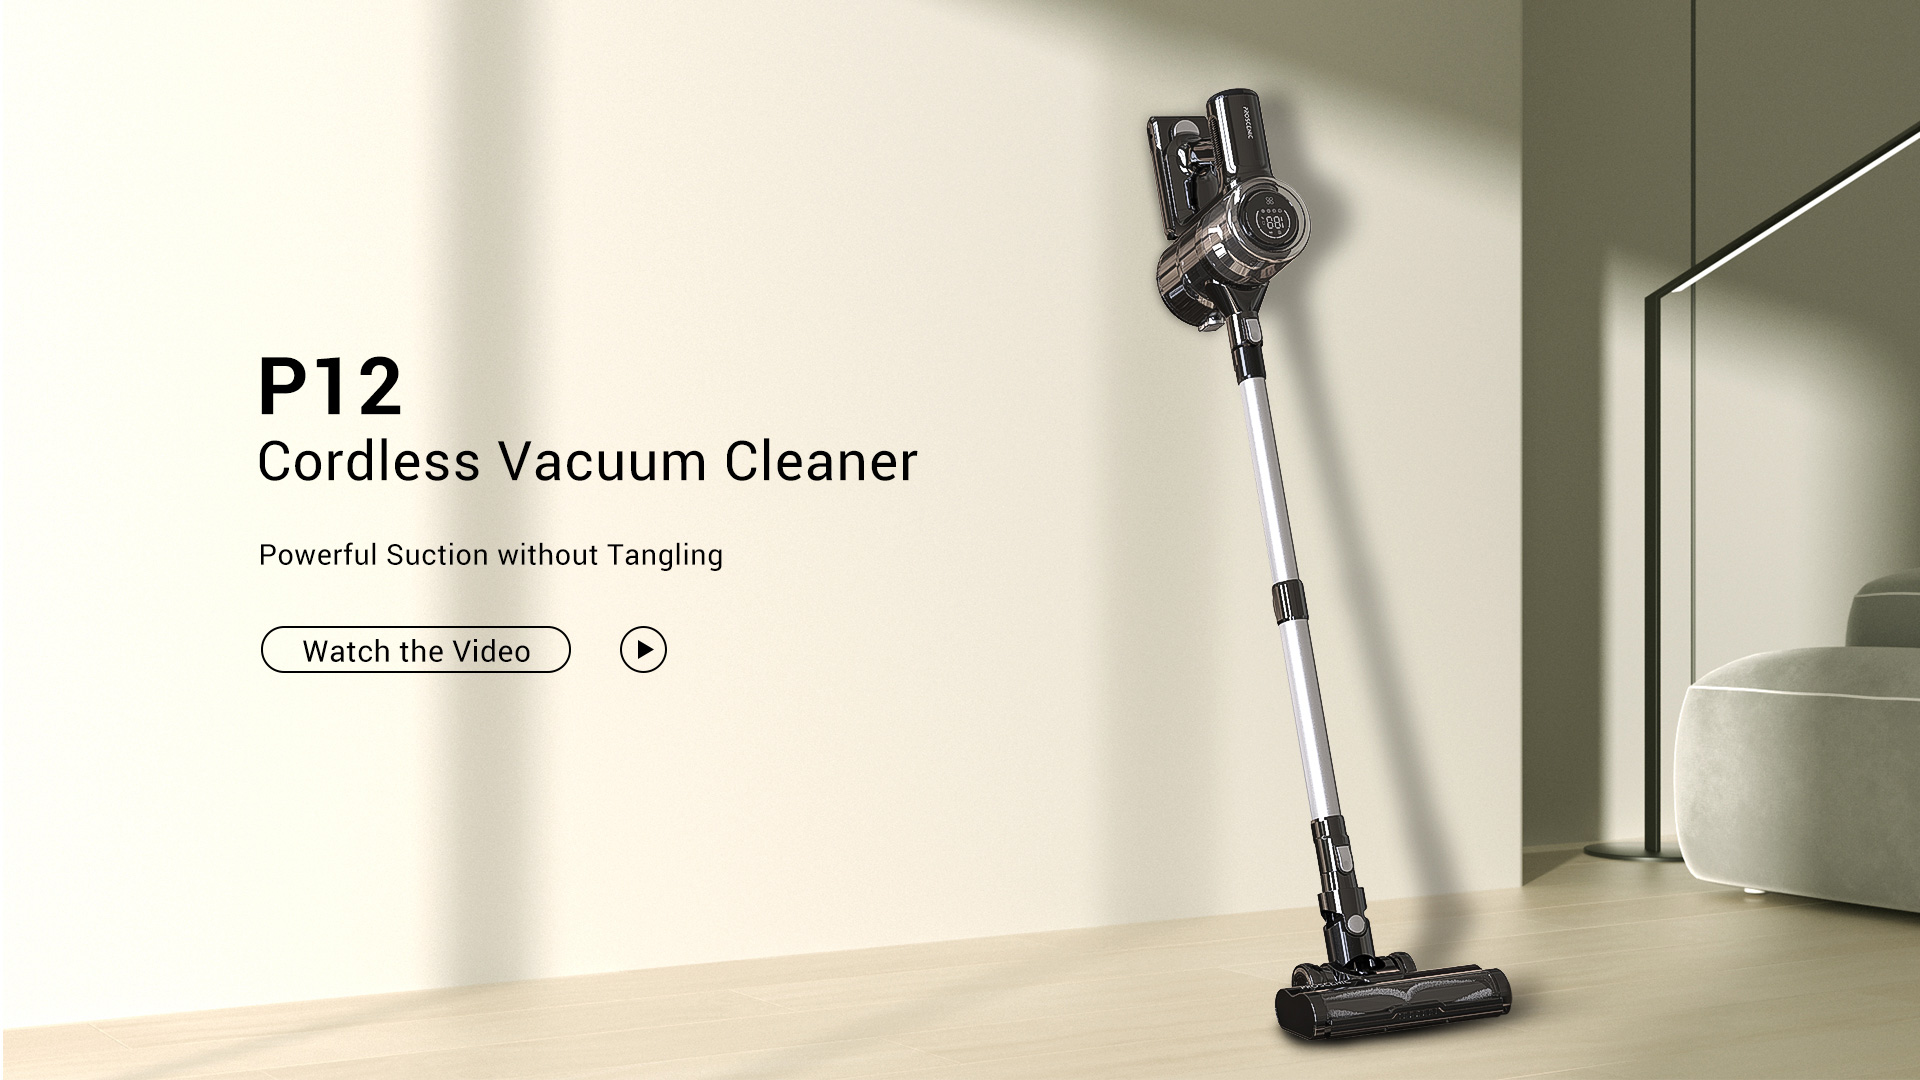 Proscenic P12 vacuum cleaner launches as Dyson V15 Detect